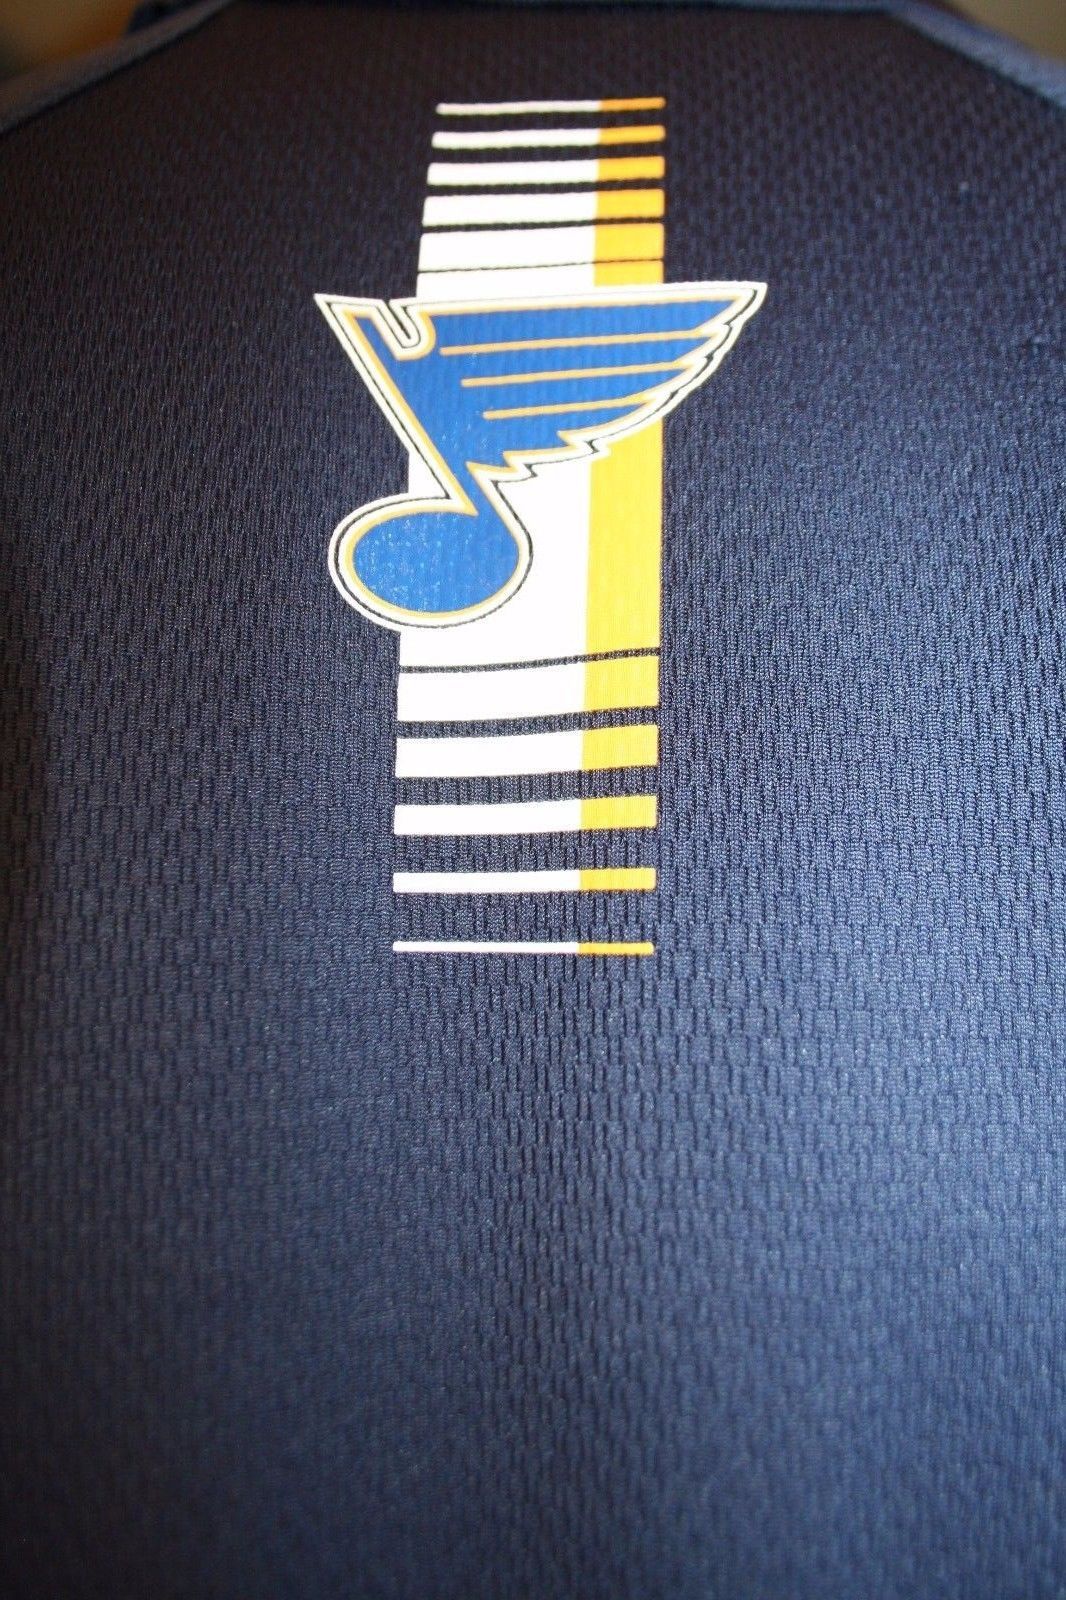 Primary image for ST. LOUIS BLUES REEBOK Play-Dry Blue Note NAVY POLO/GOLF SHIRT MEN'S LG